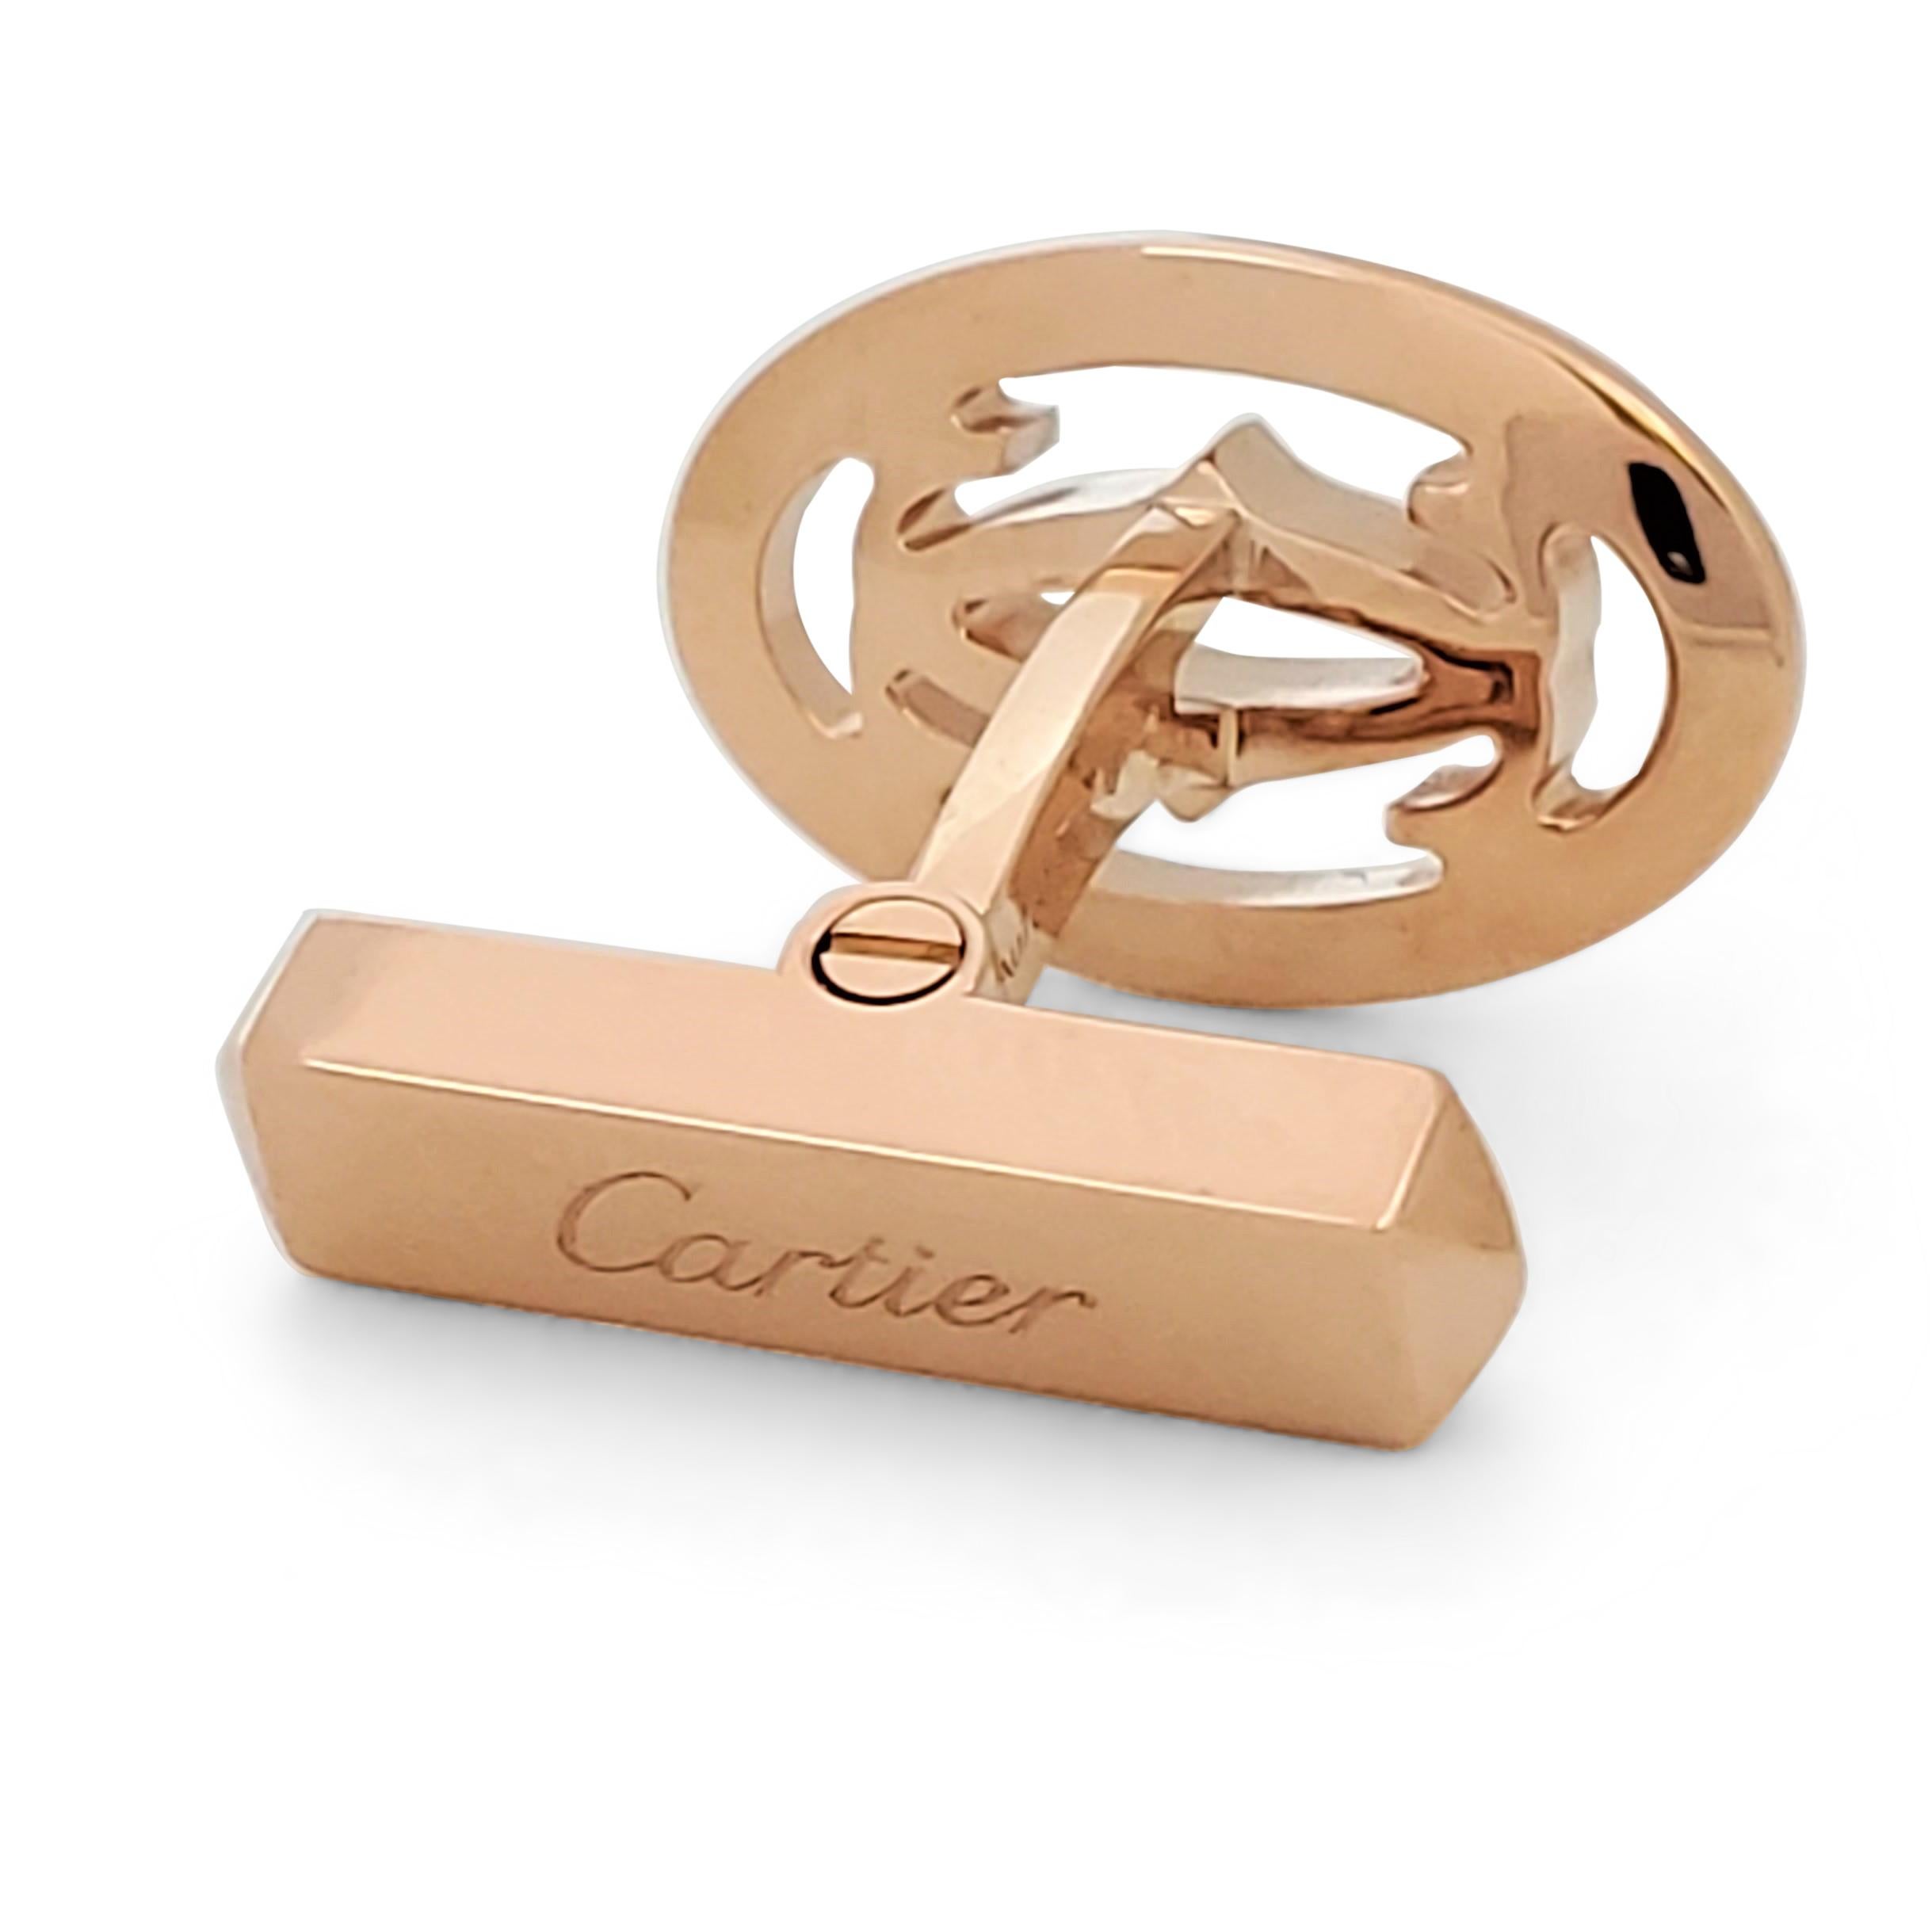 Authentic Cartier cufflinks crafted in 18 karat rose gold feature the house's iconic double C motif. Signed Cartier, Au750, with serial number and French hallmark. The cufflinks are presented with the original box, no papers. CIRCA 2000s.

Original